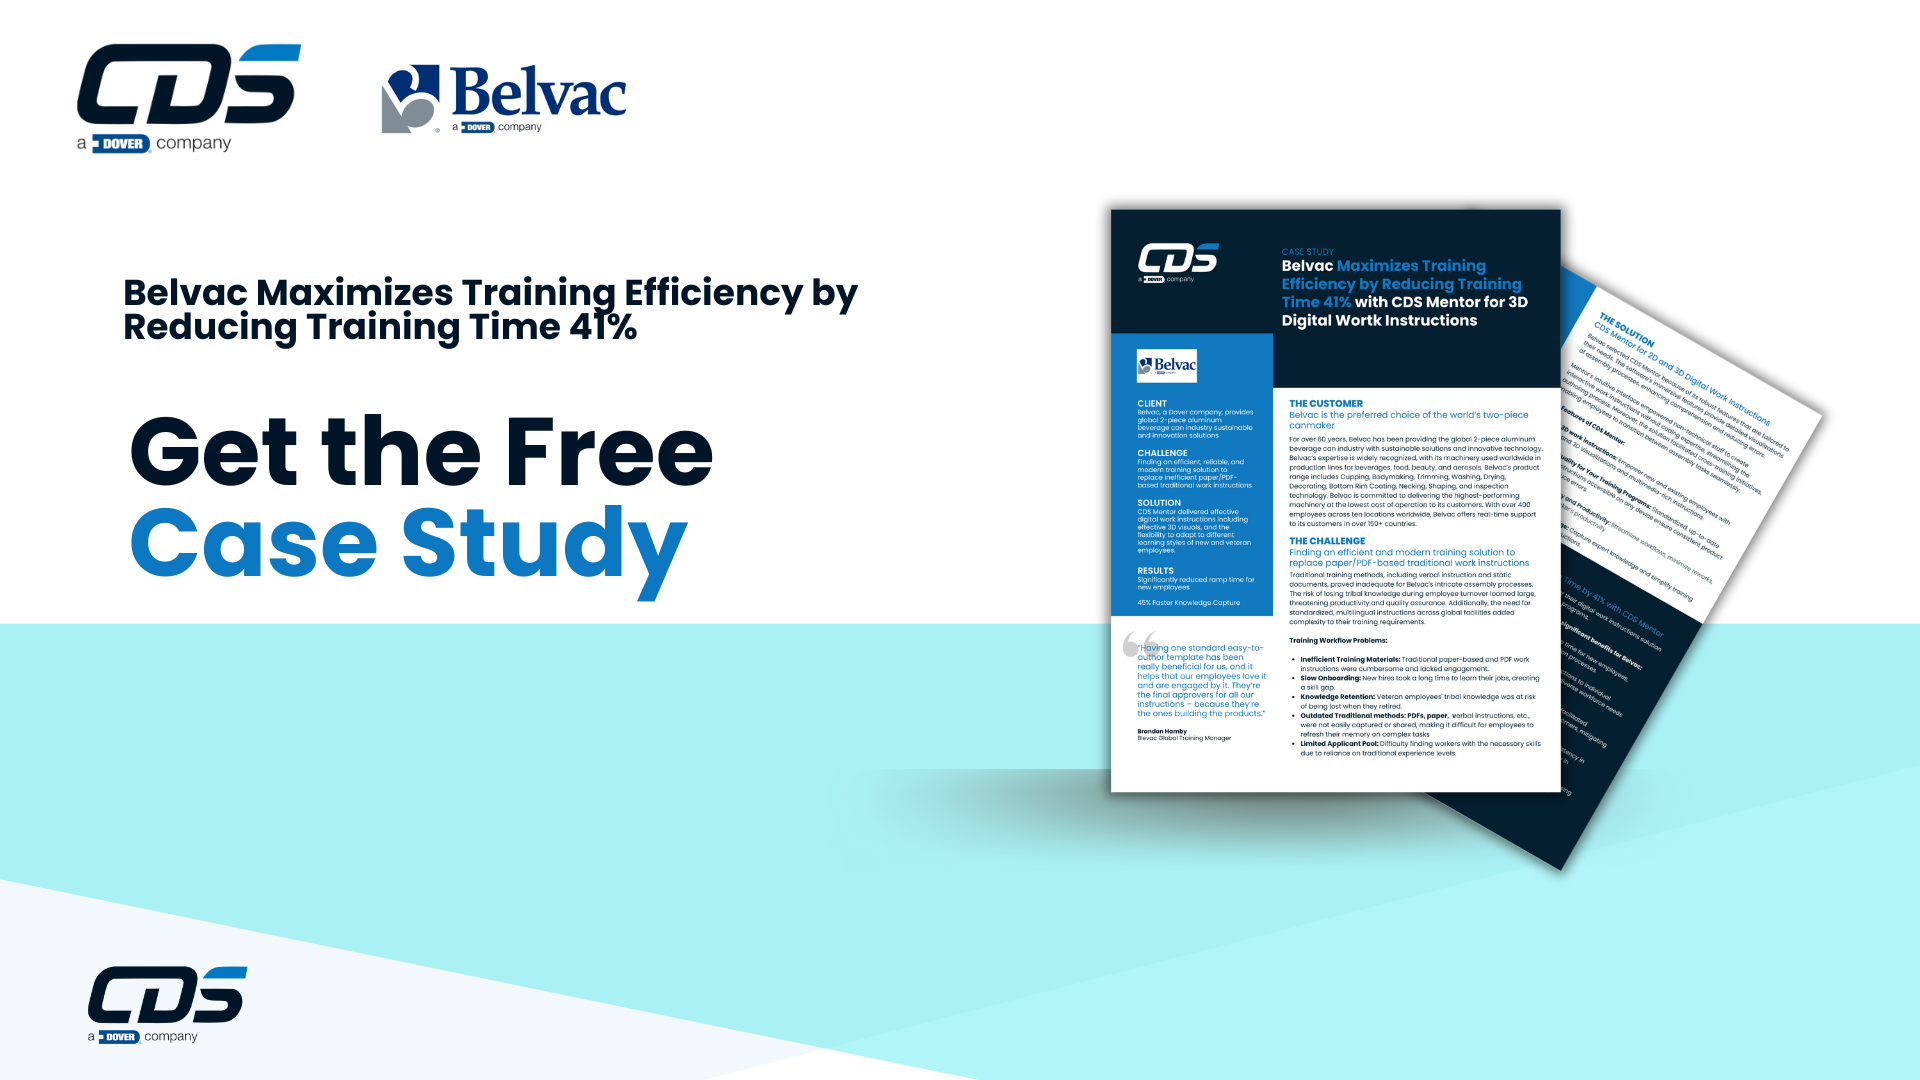 Belvac Maximizes Training Efficiency by Reducing Training Time 41%